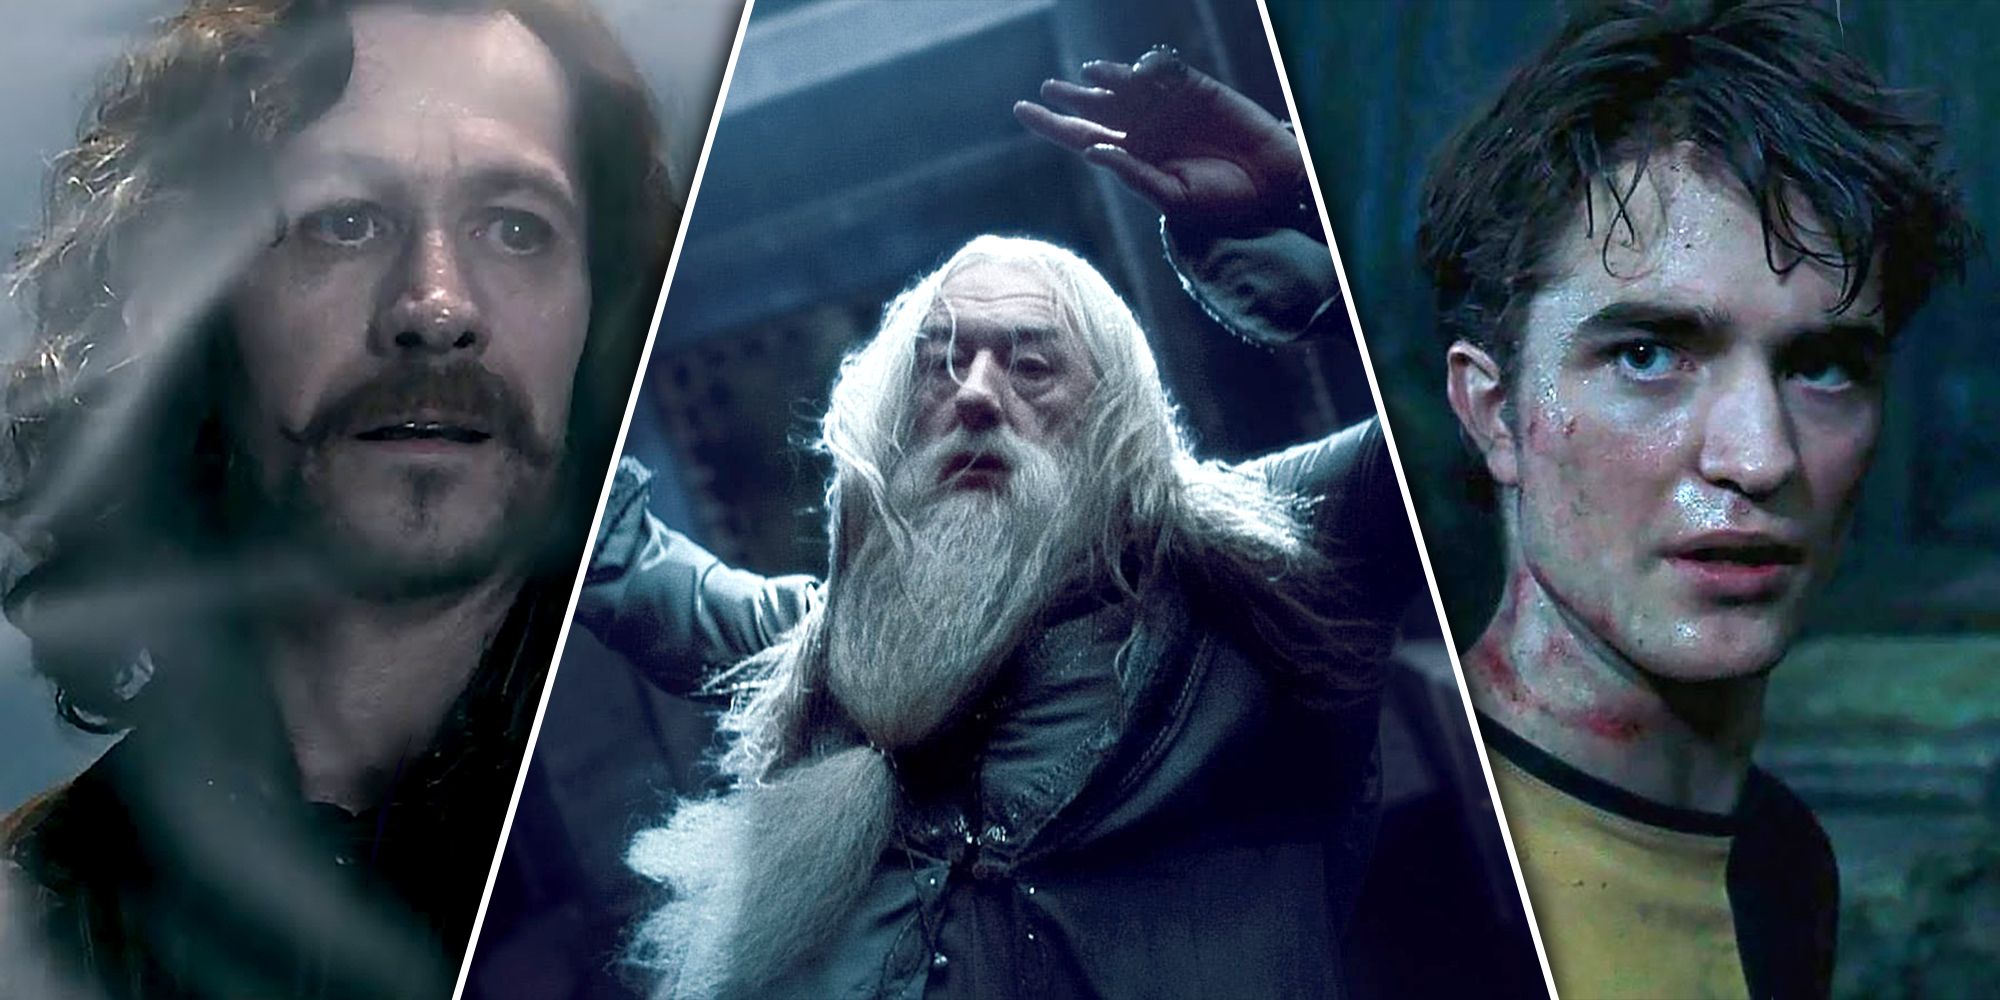 Sirius Black Dumbledore and Cedric Diggory from Harry Potter